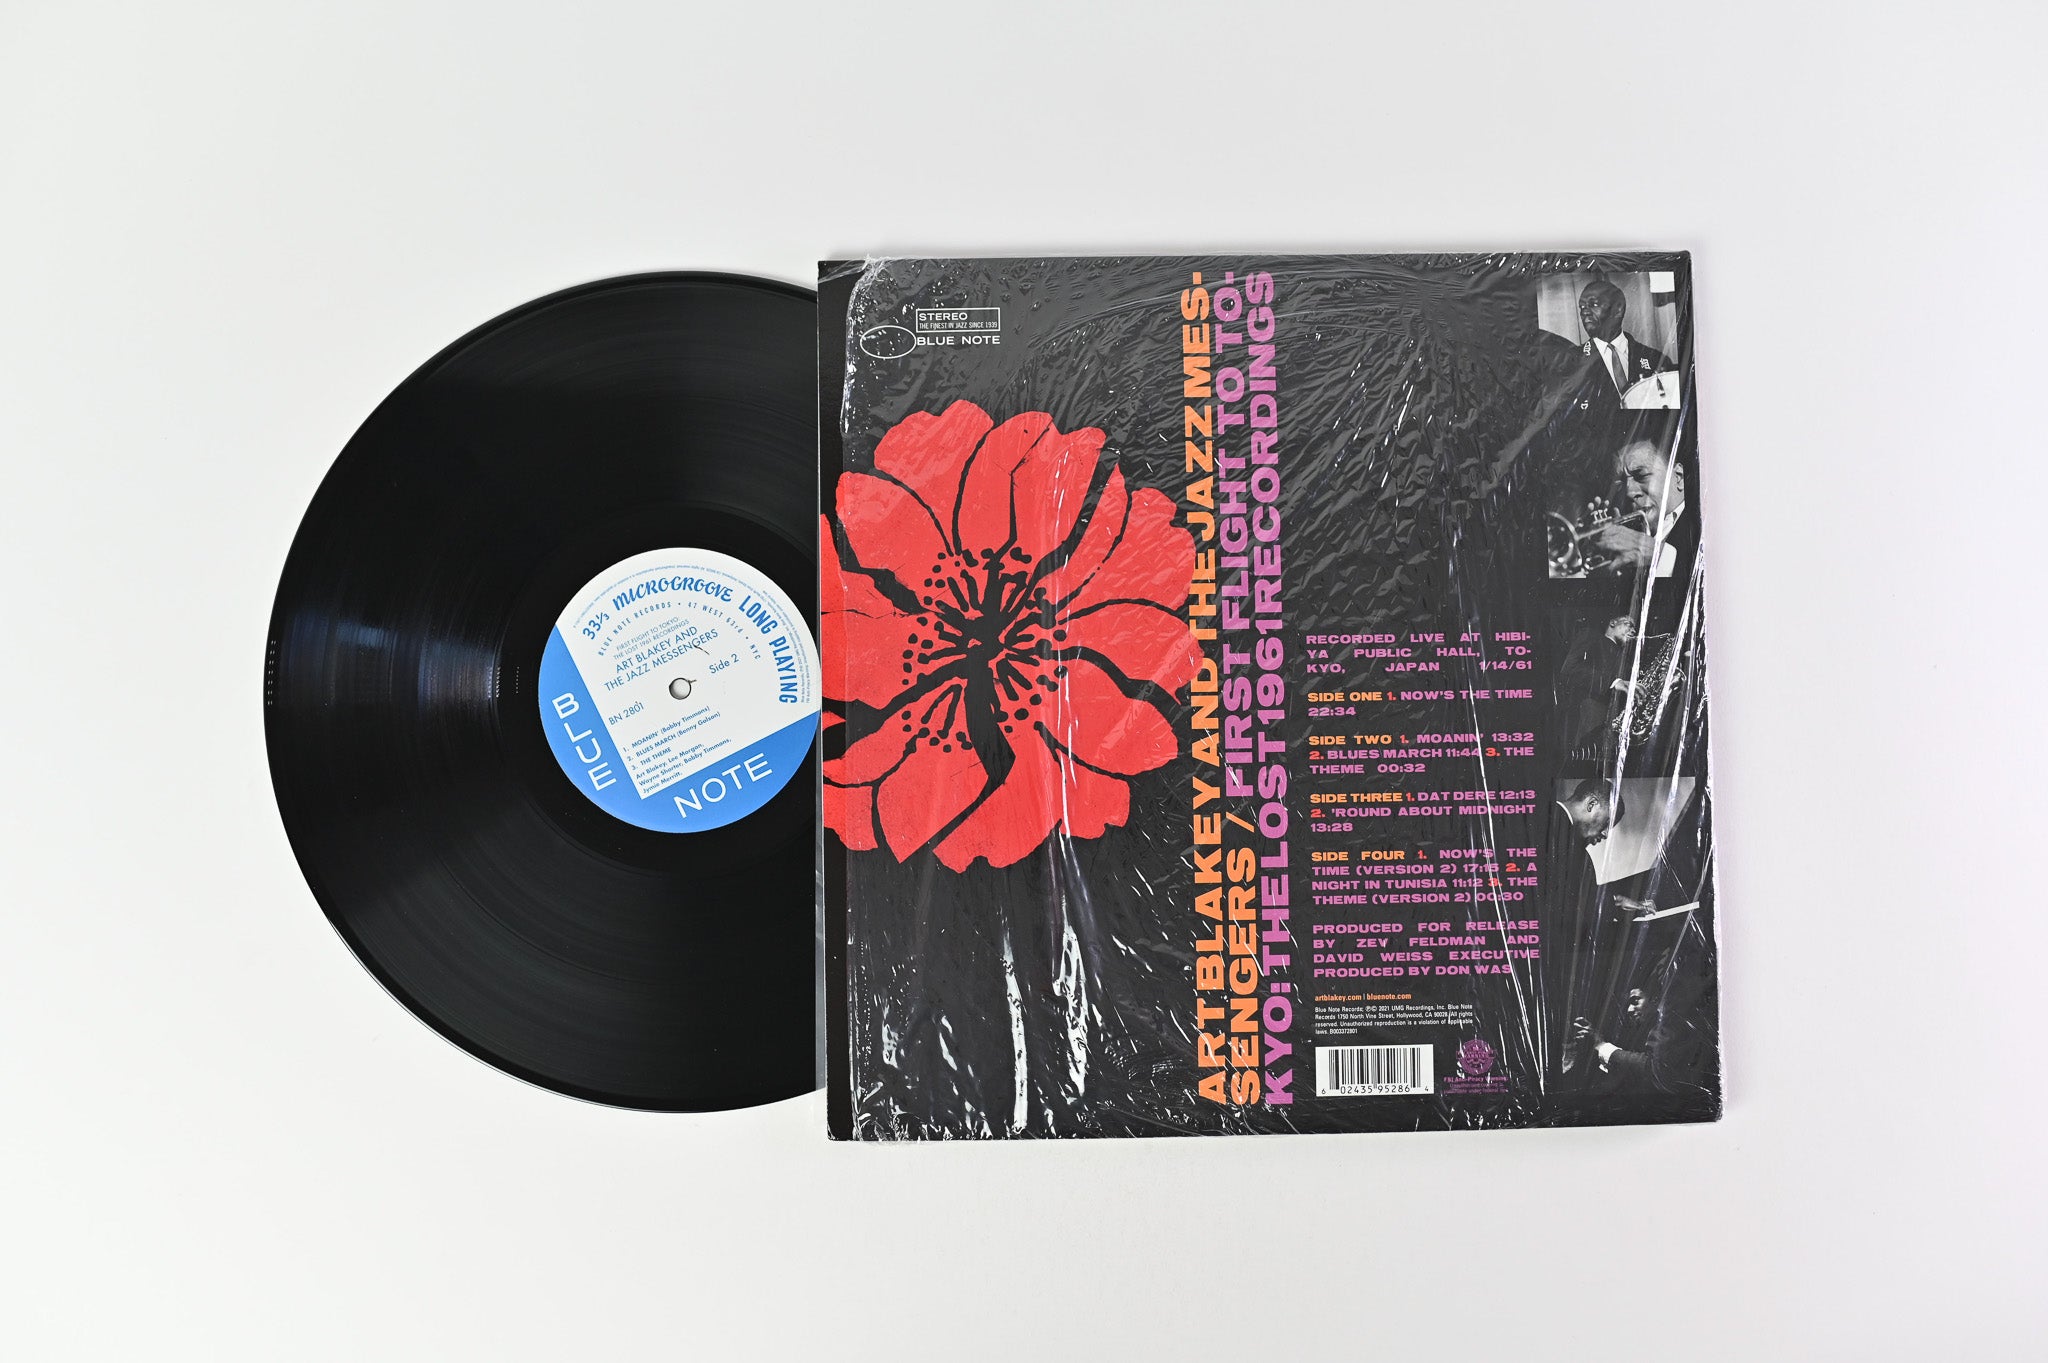 Art Blakey & The Jazz Messengers - First Flight To Tokyo: The Lost 1961 Recordings on Blue Note Ltd Reissue